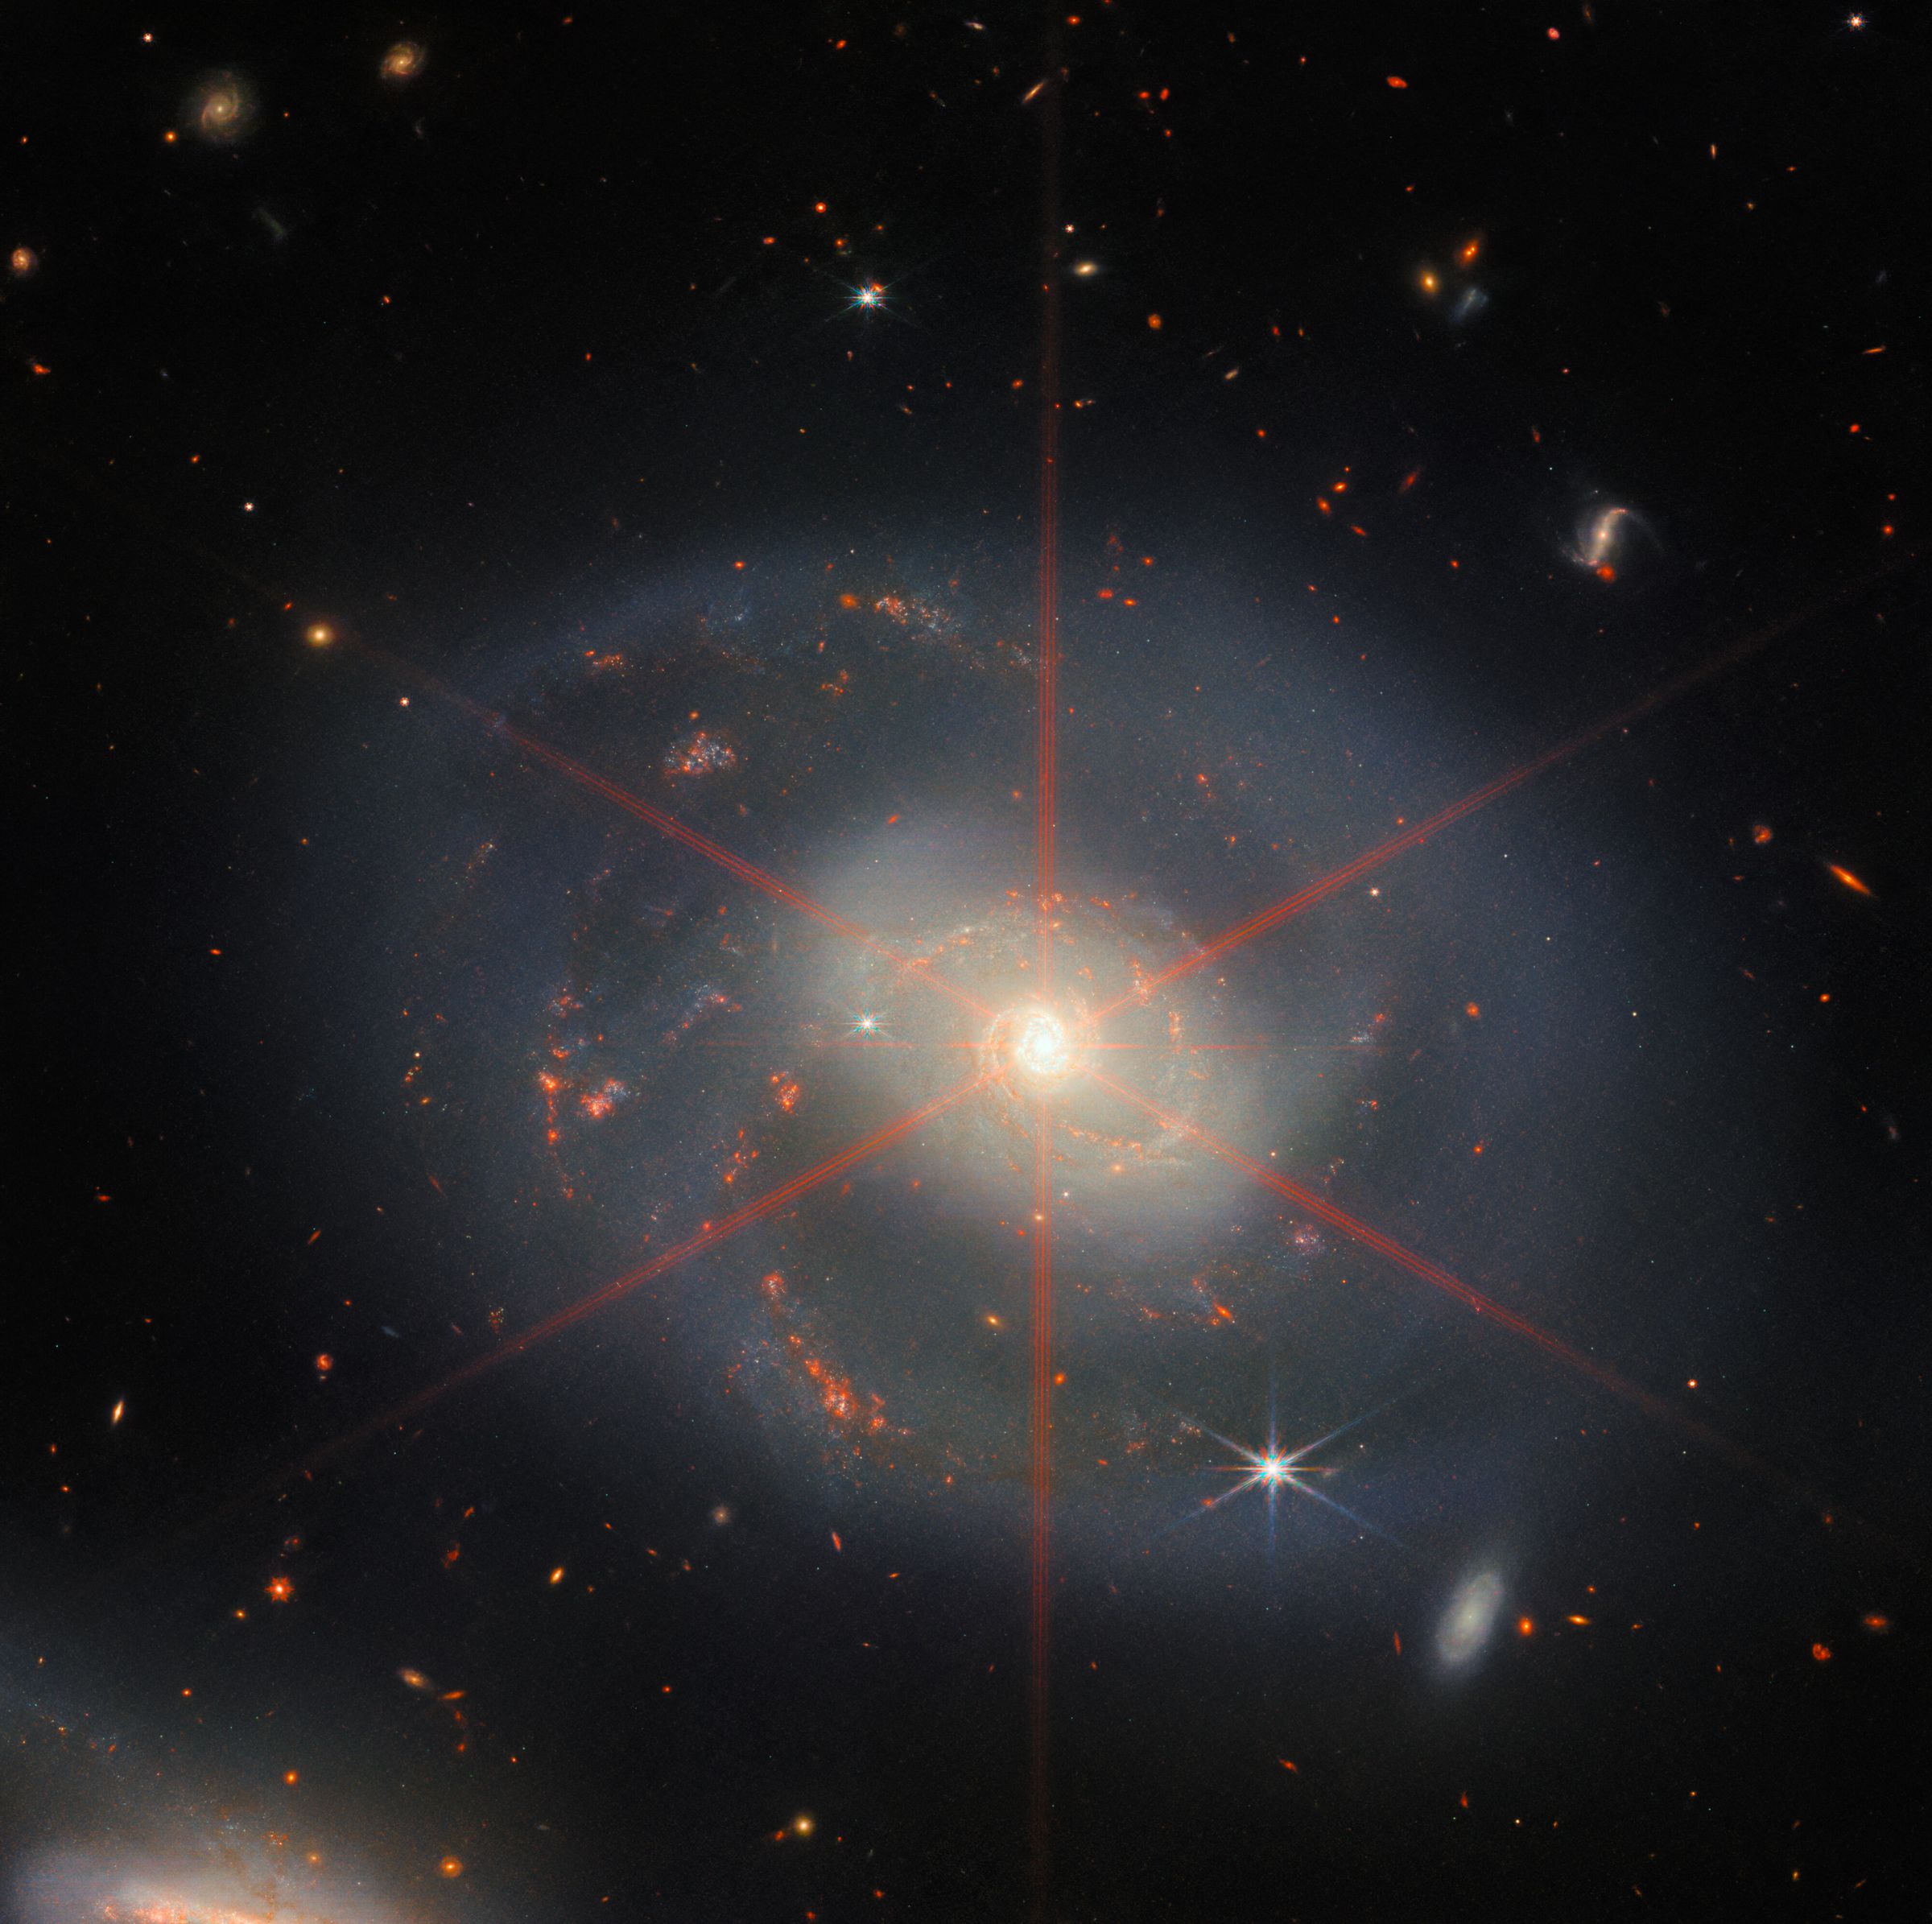 This image shows a spiral galaxy dominated by a bright central region.  The galaxy has blue-purple hues with orange-red regions filled with stars.  Also visible is a large diffractive peak that appears as a star pattern over the galaxy's central region.  Many stars and galaxies fill the background scene